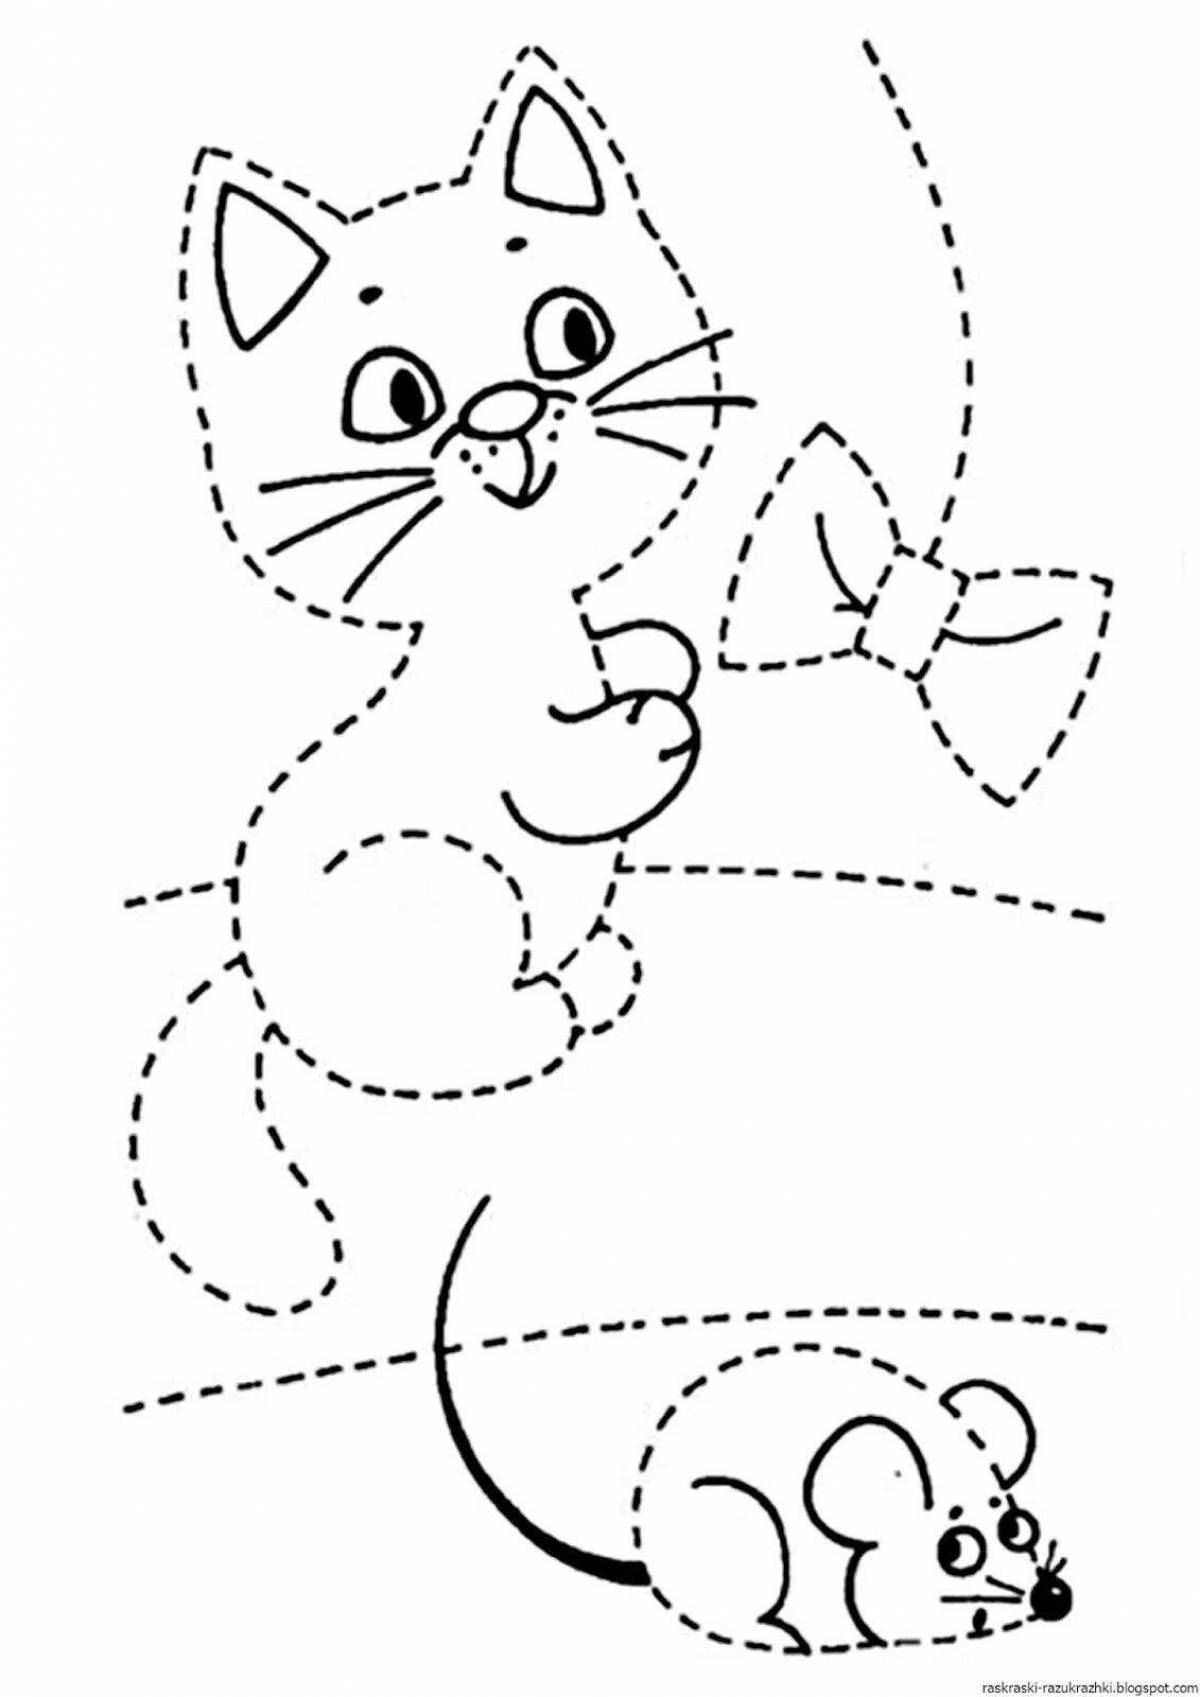 Coloring page with dynamic stroke